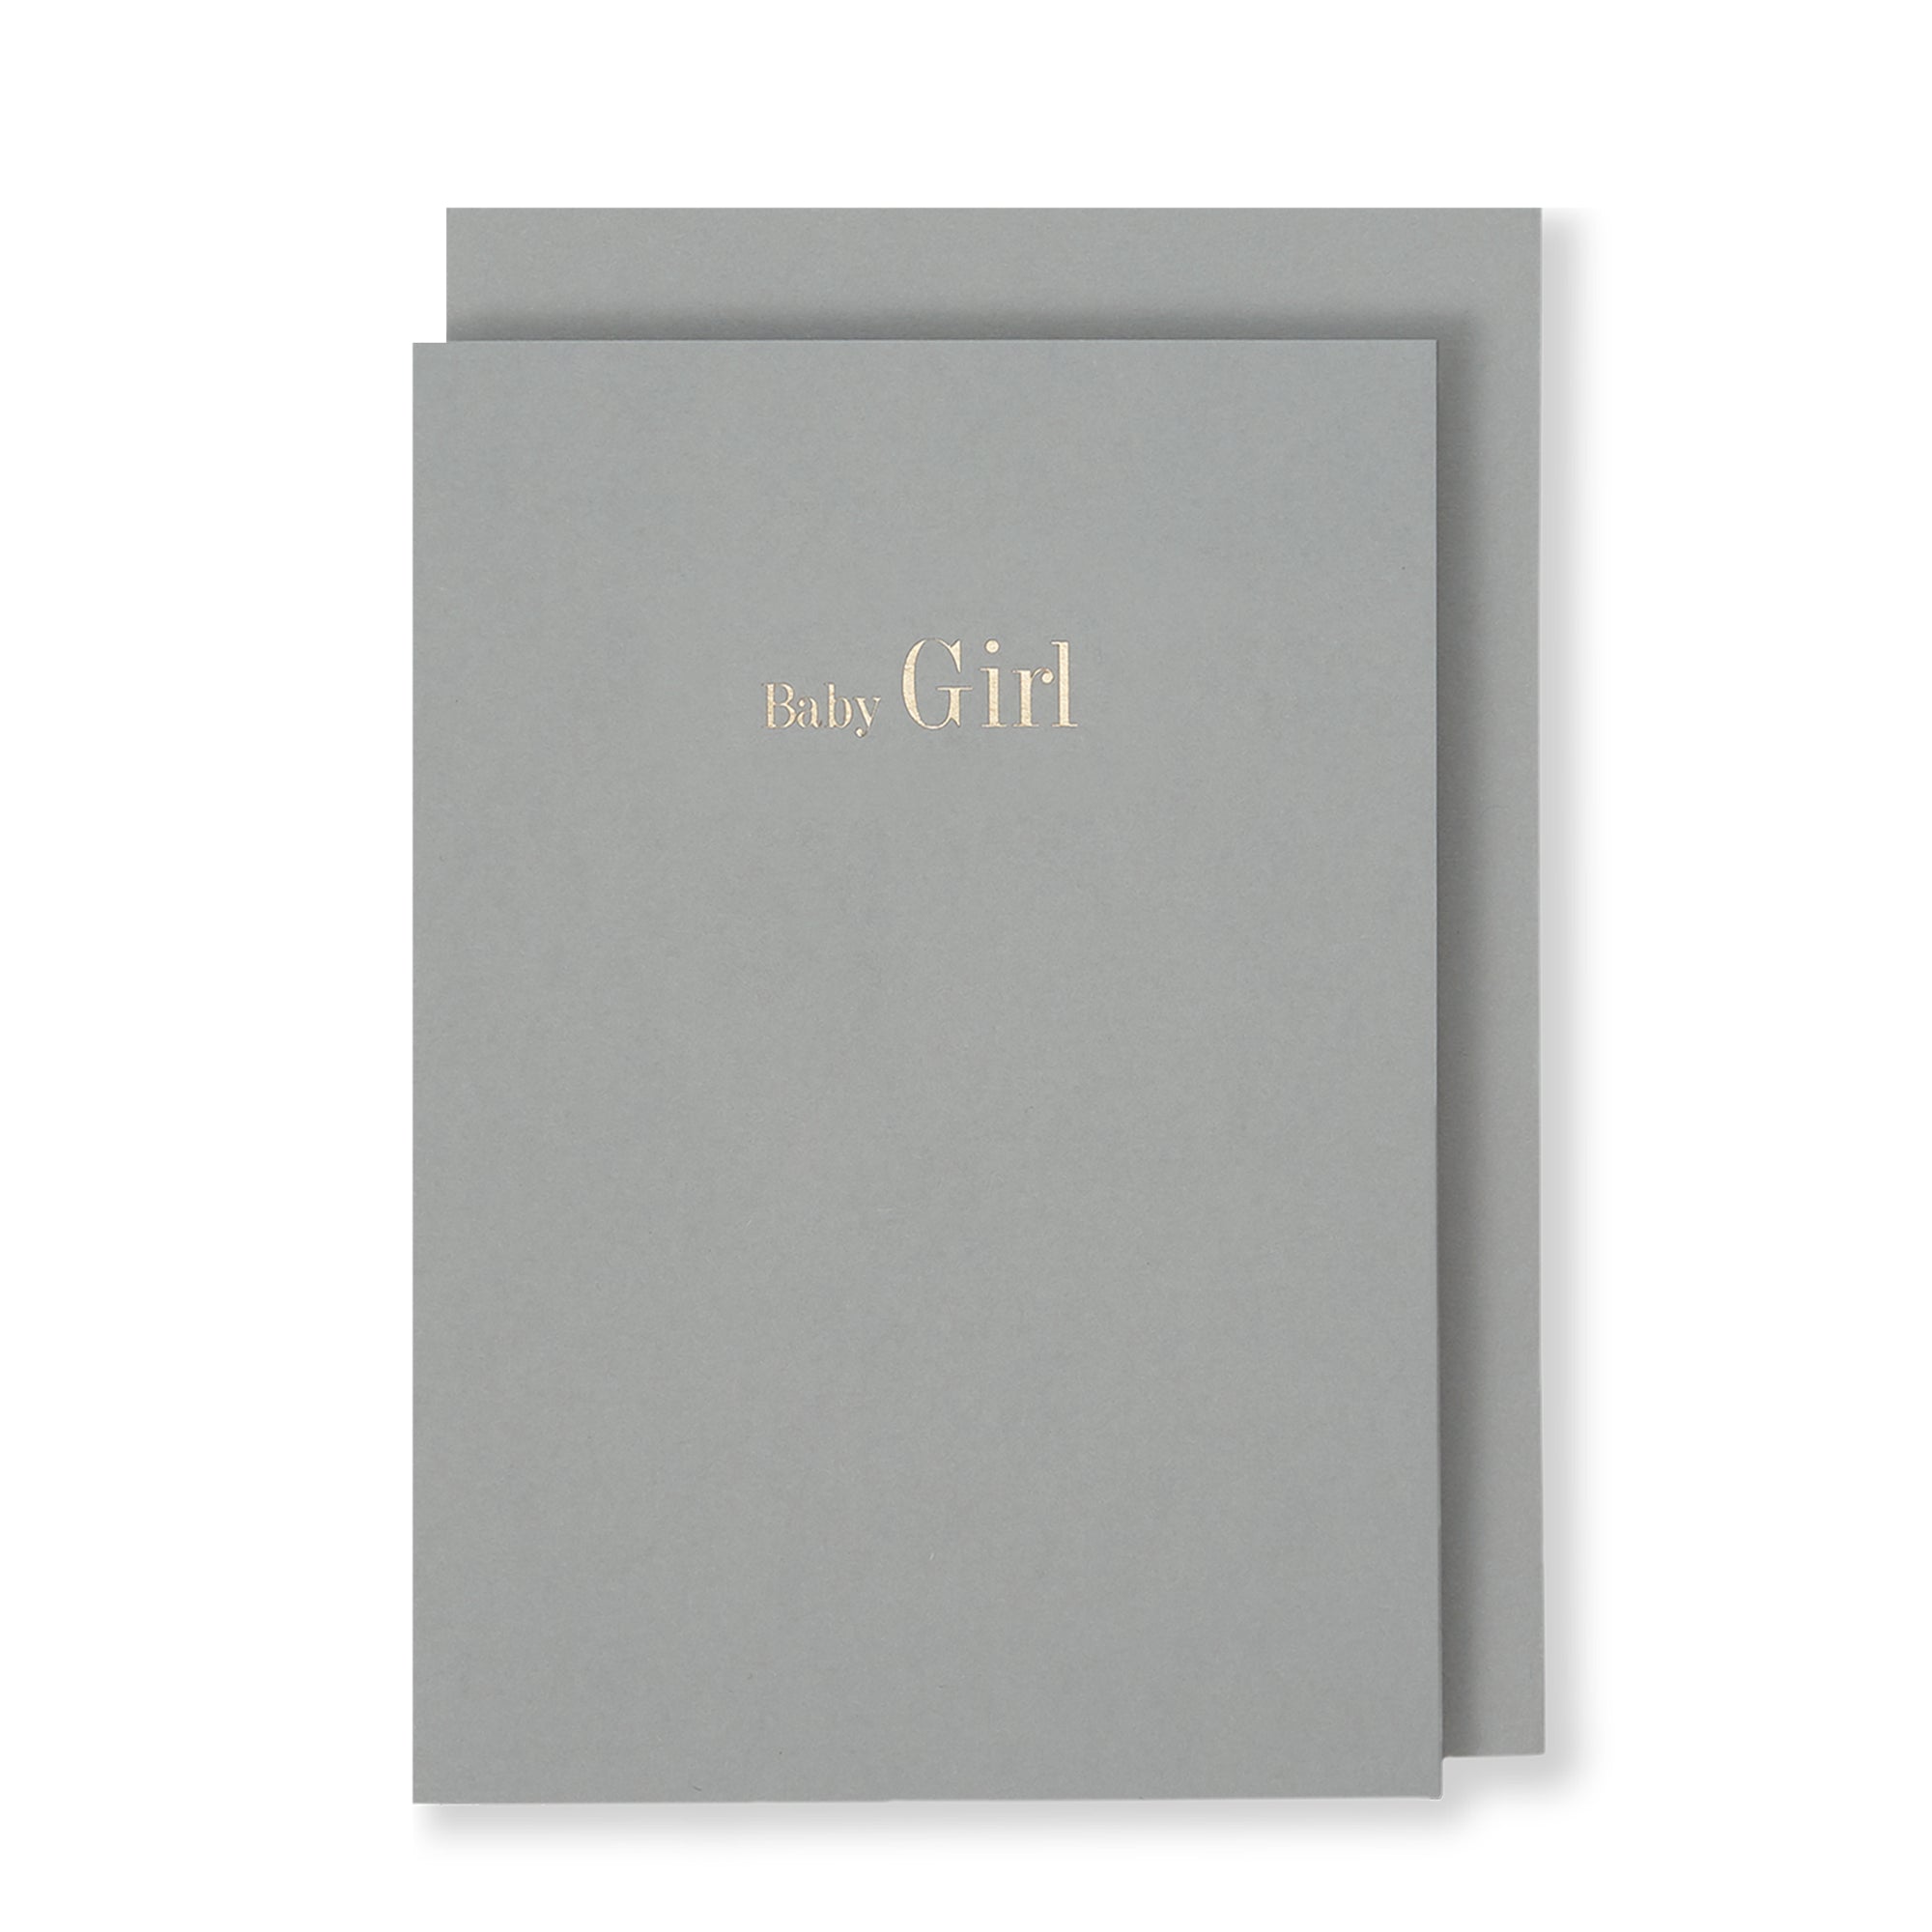 Baby Girl Greeting Card in Grey, Front